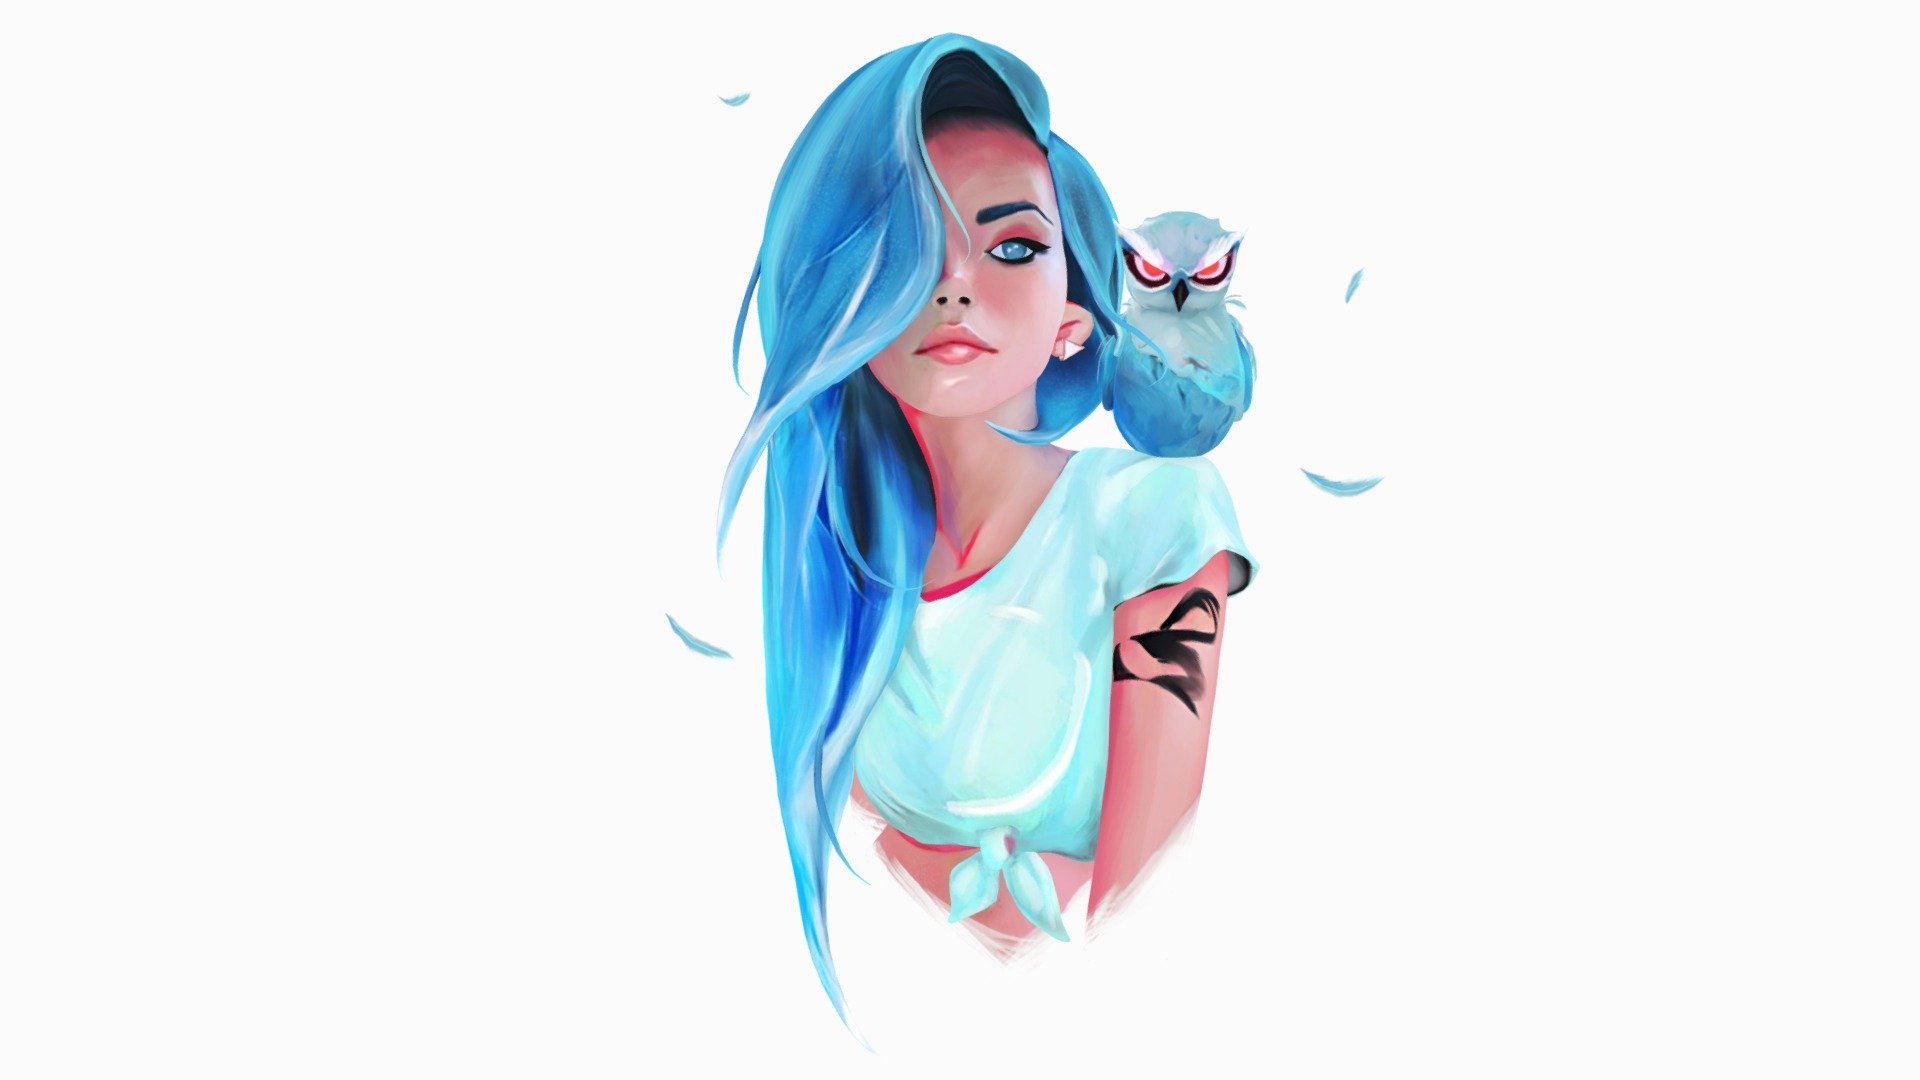 Based on concept by Ross Tran 
https://www.deviantart.com/rossdraws/art/Sapphire-698976408

Hand-paint study 01:
-to convey the feelings from concept.

In my next artwork I'll study anatomy 3d model